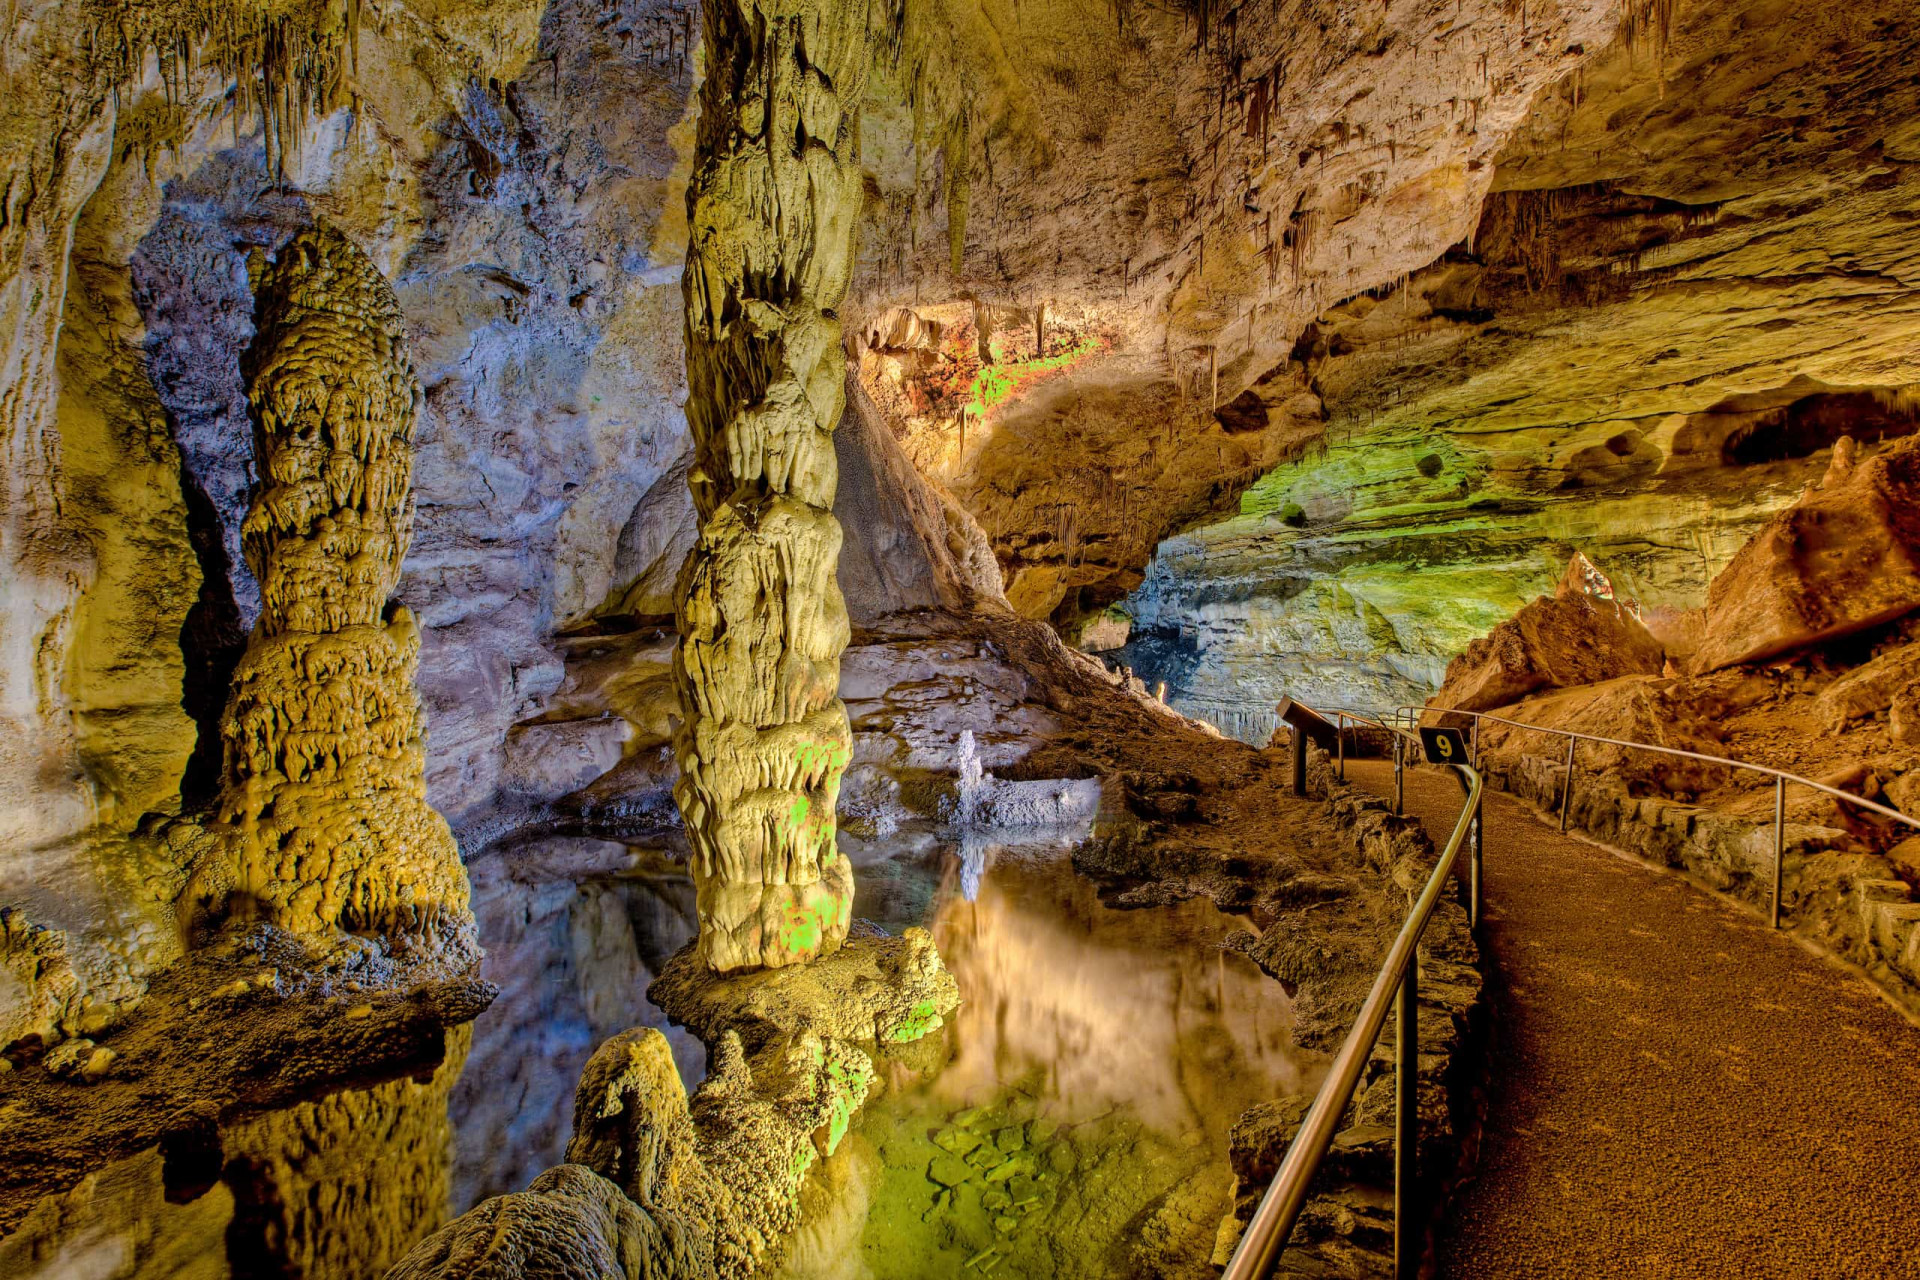 <p>Delve underground and discover the Carlsbad Caverns National Park. Comprised of around 120 known caves, this amazing subterranean UNESCO World Heritage Site is located in the Guadalupe Mountains of southeastern New Mexico.</p>